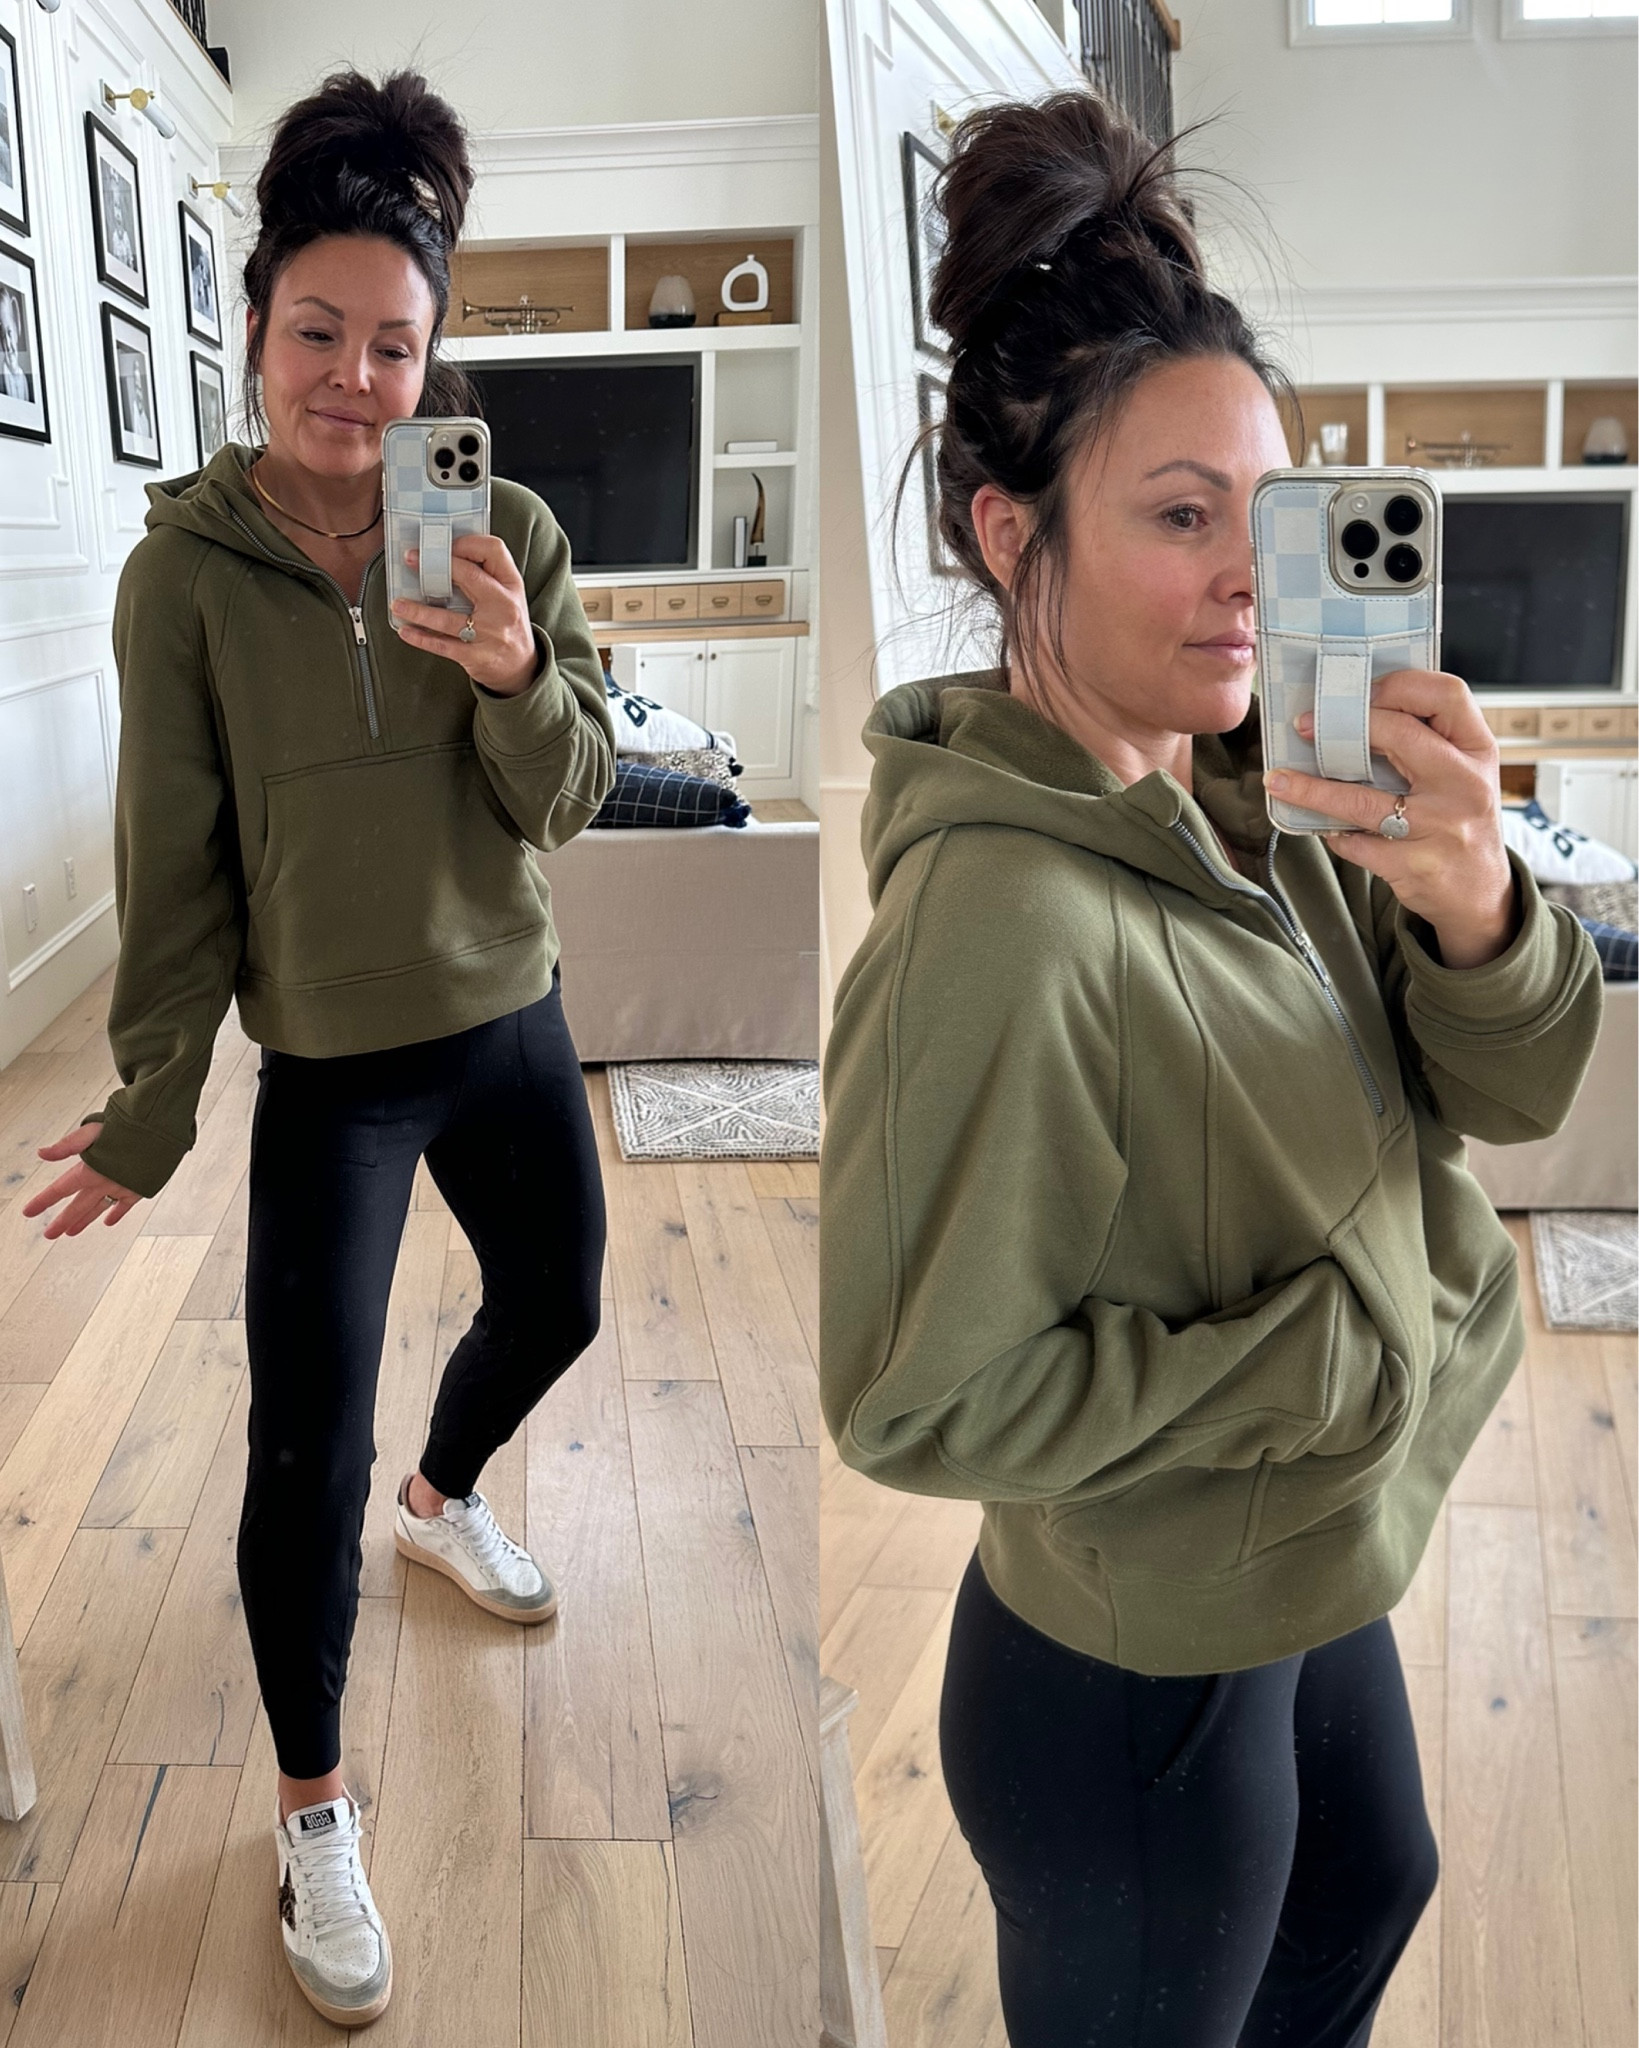 Workout Gear Inspired By Lululemon on  - An Unblurred Lady  Womens  activewear tops, Womens workout outfits, Women hoodies sweatshirts